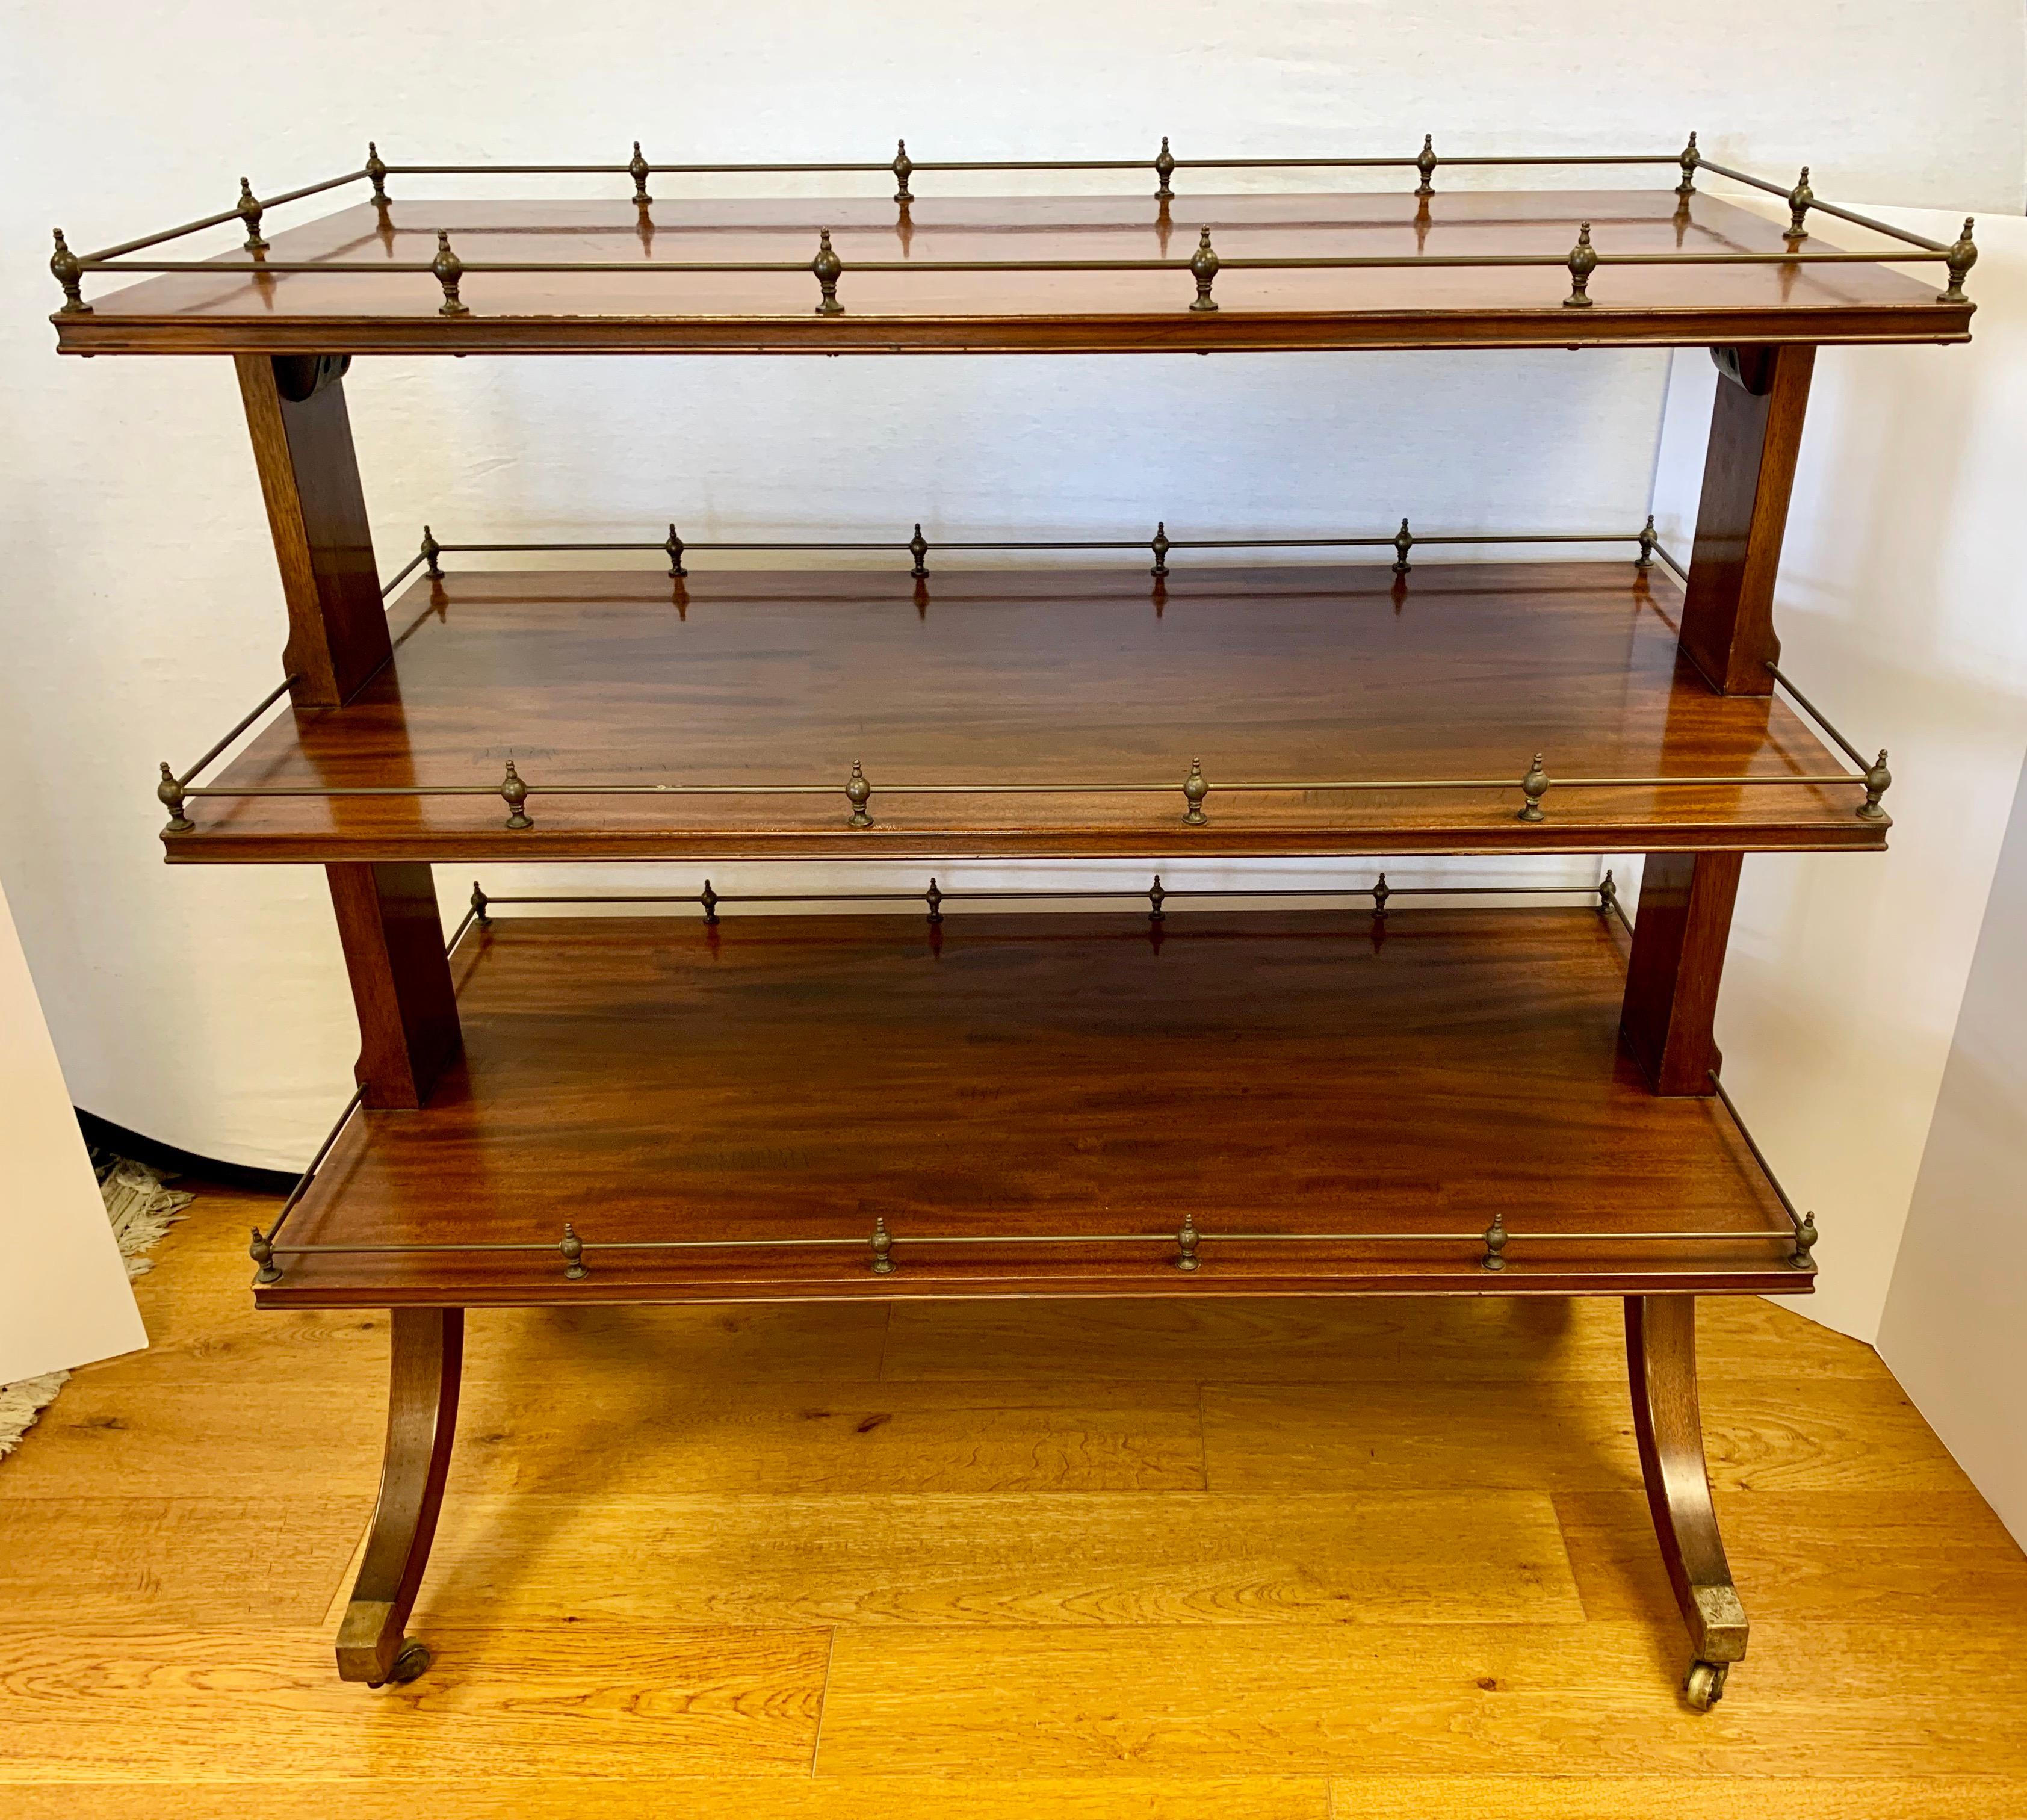 Antique three-tiered mahogany trolley is perfect for serving tea, dessert or drinks. Features a brass gallery all around each shelf and beautiful flame mahogany. On brass castors for ease of movement.